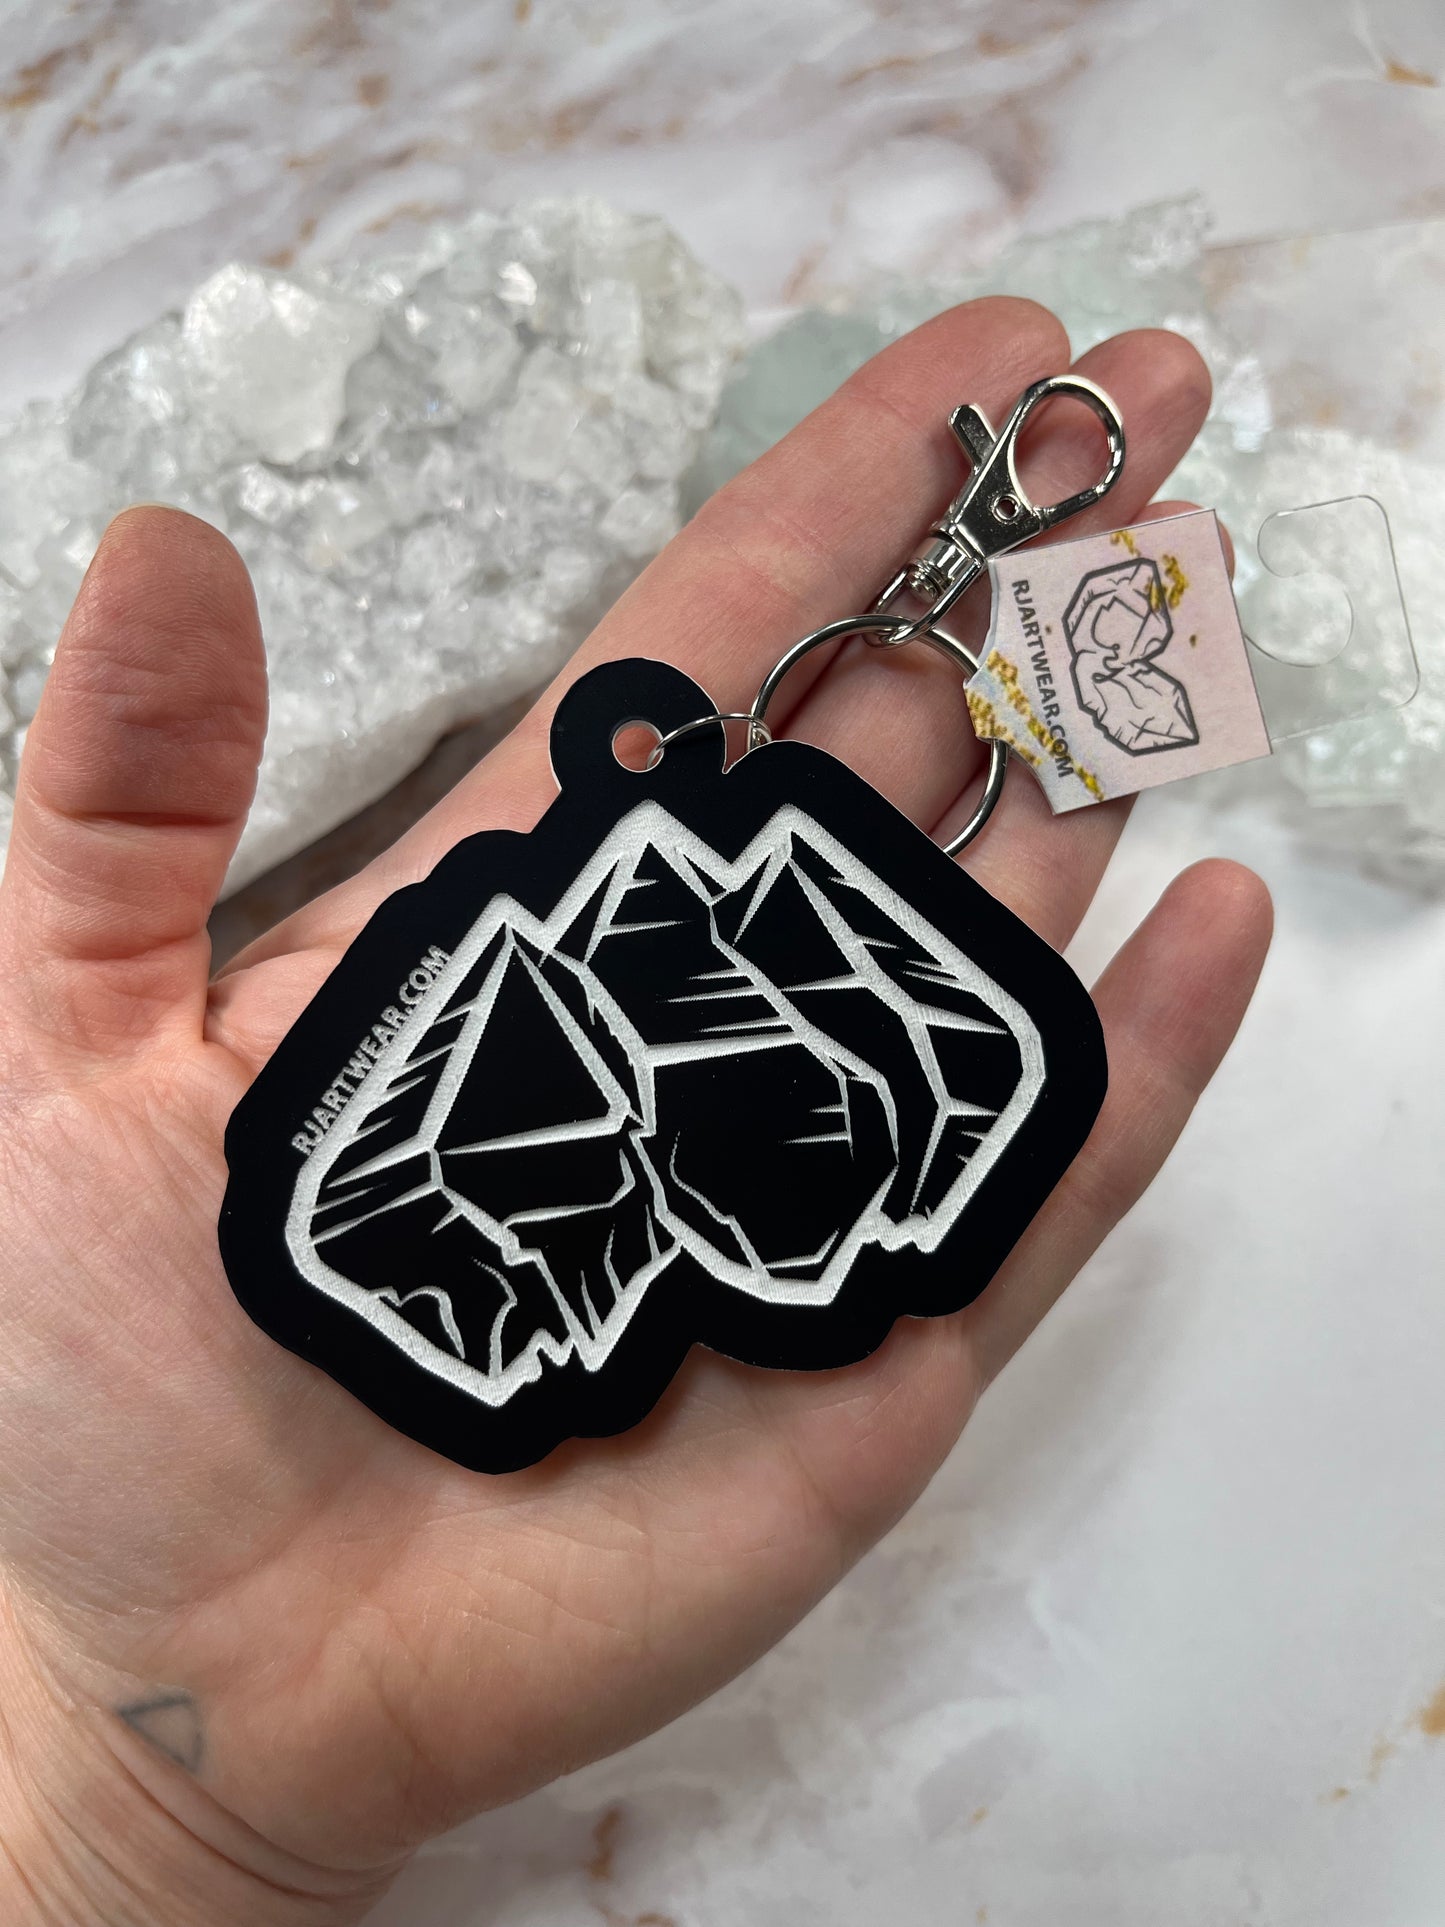 Triple Scepter Acrylic Keychain - Black and White